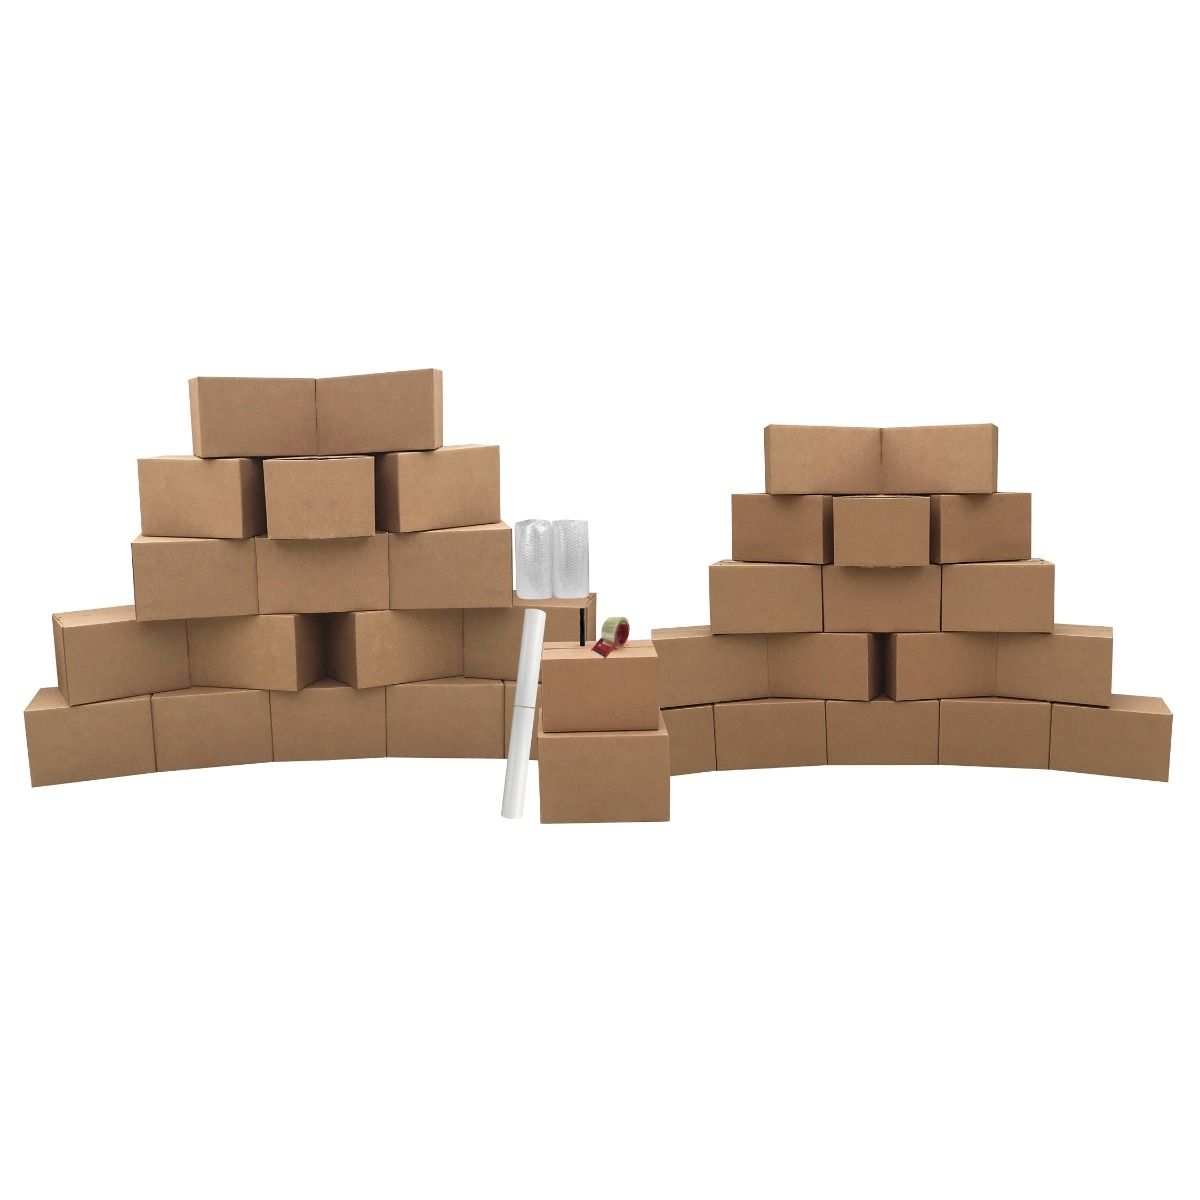 Affordable Moving Boxes and Supplies: Packing Collectibles and